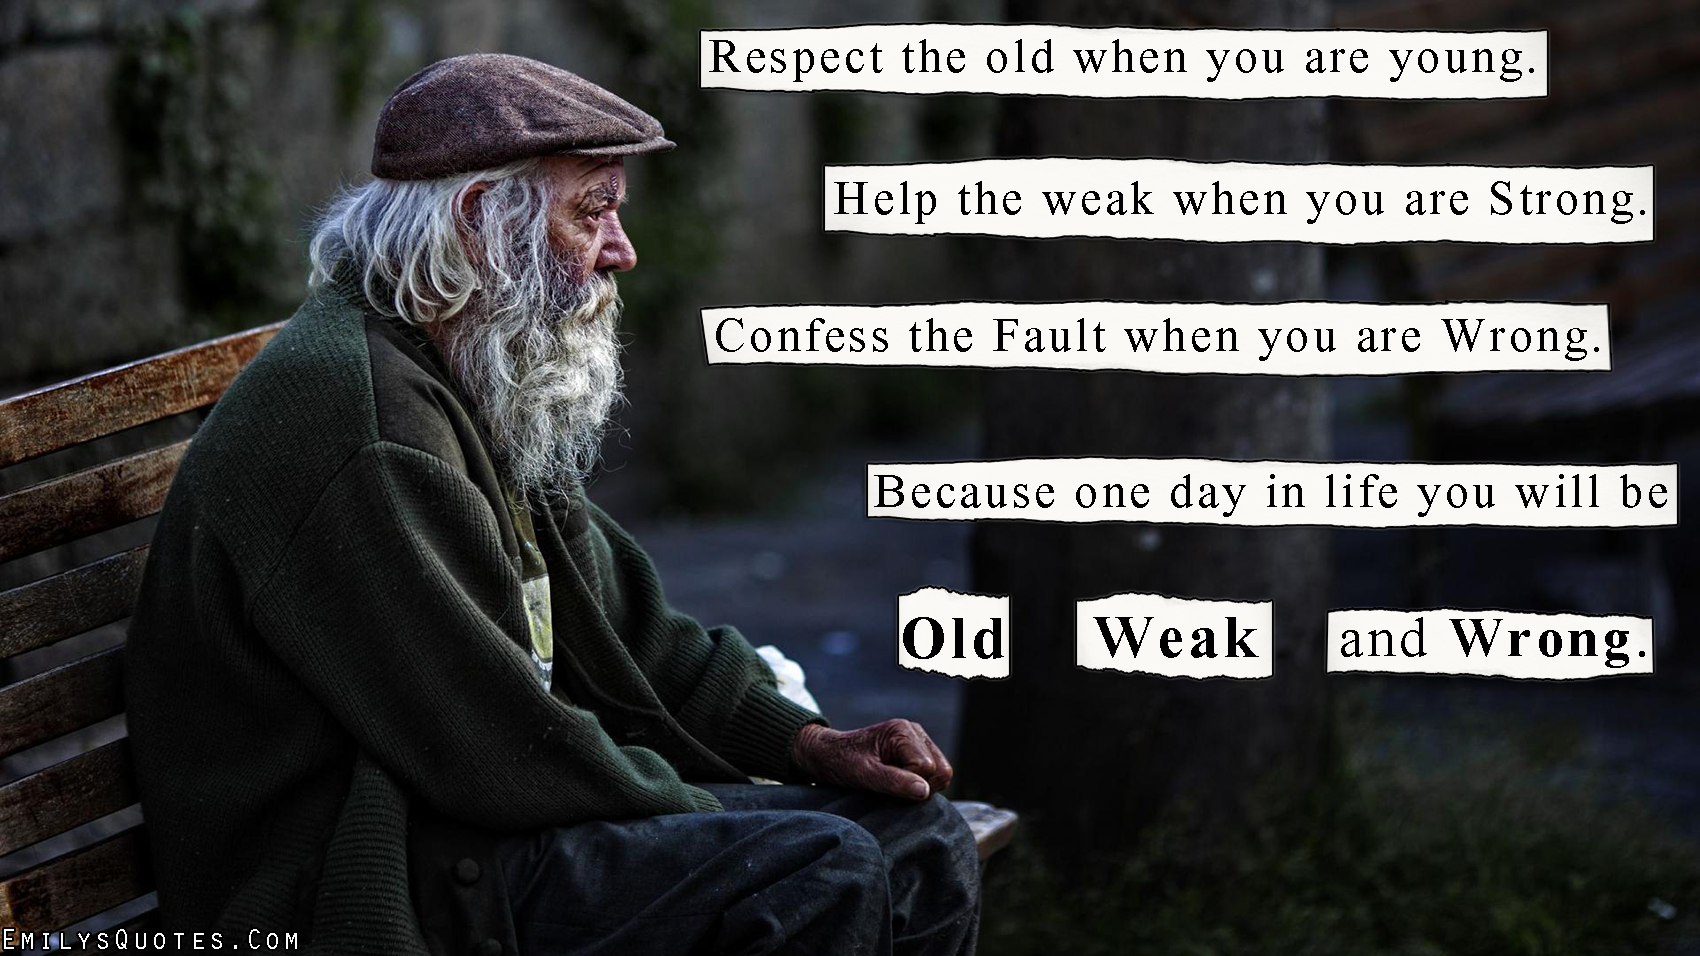 Respect the old when you are young. Help the weak when you are Strong. Confess the Fault when you are Wrong. Because one day in life you will be Old, Weak and Wrong